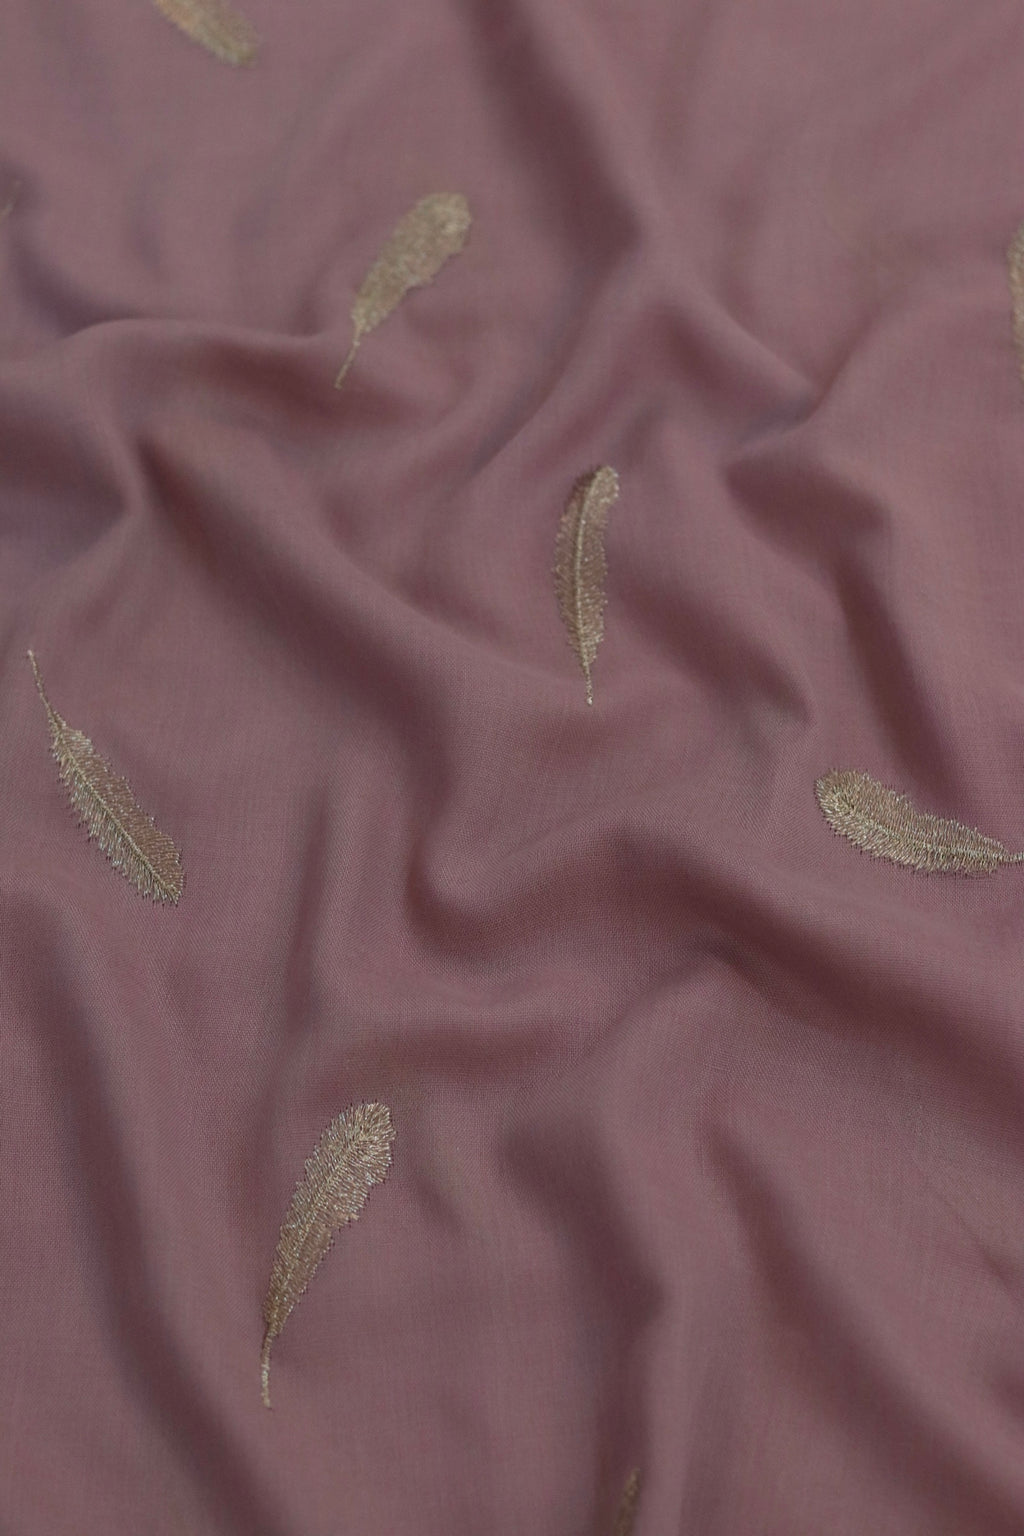 Embroidered Viscose - Dusty Pink